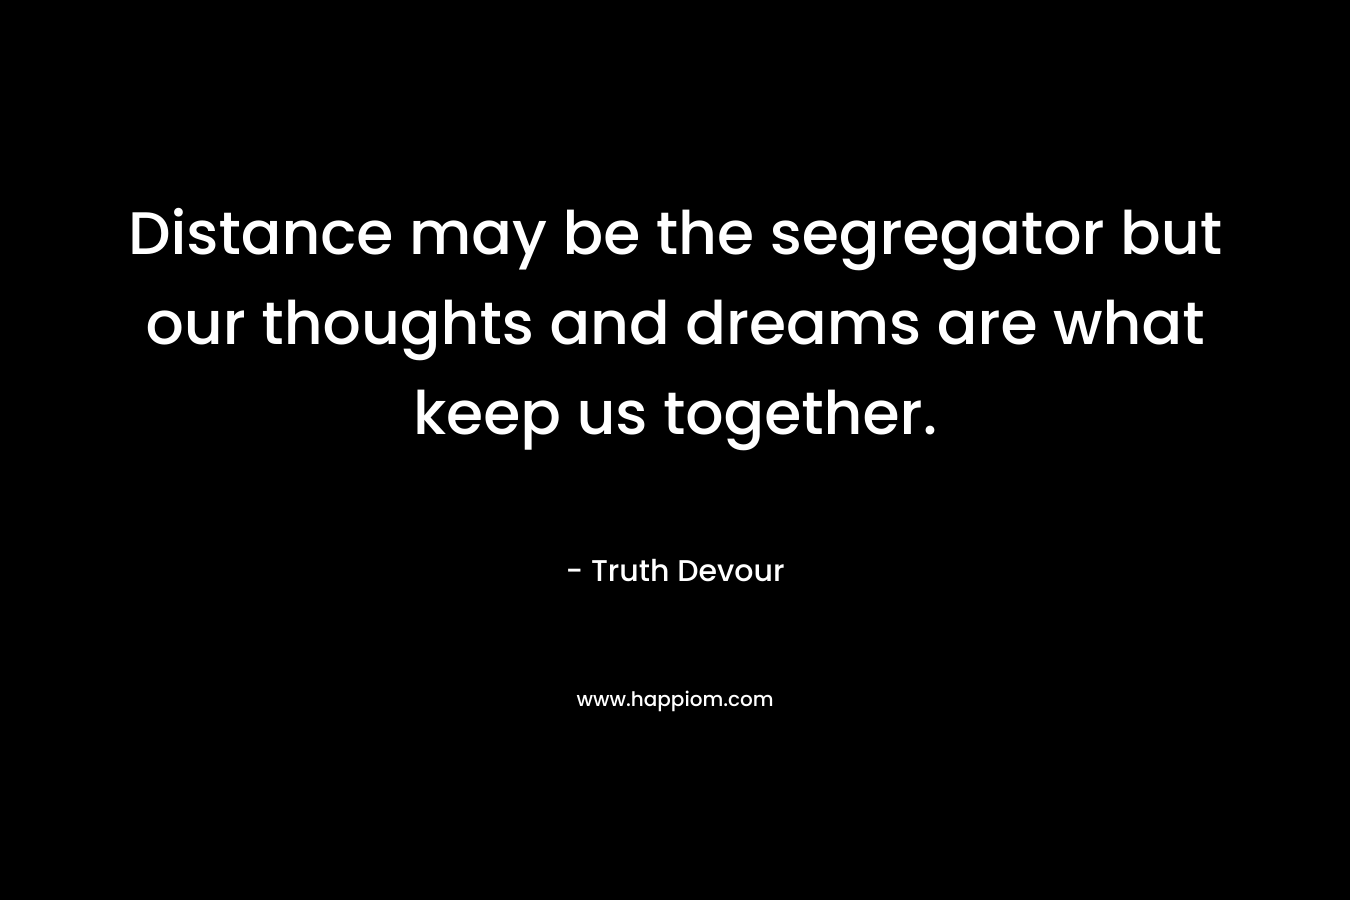 Distance may be the segregator but our thoughts and dreams are what keep us together.